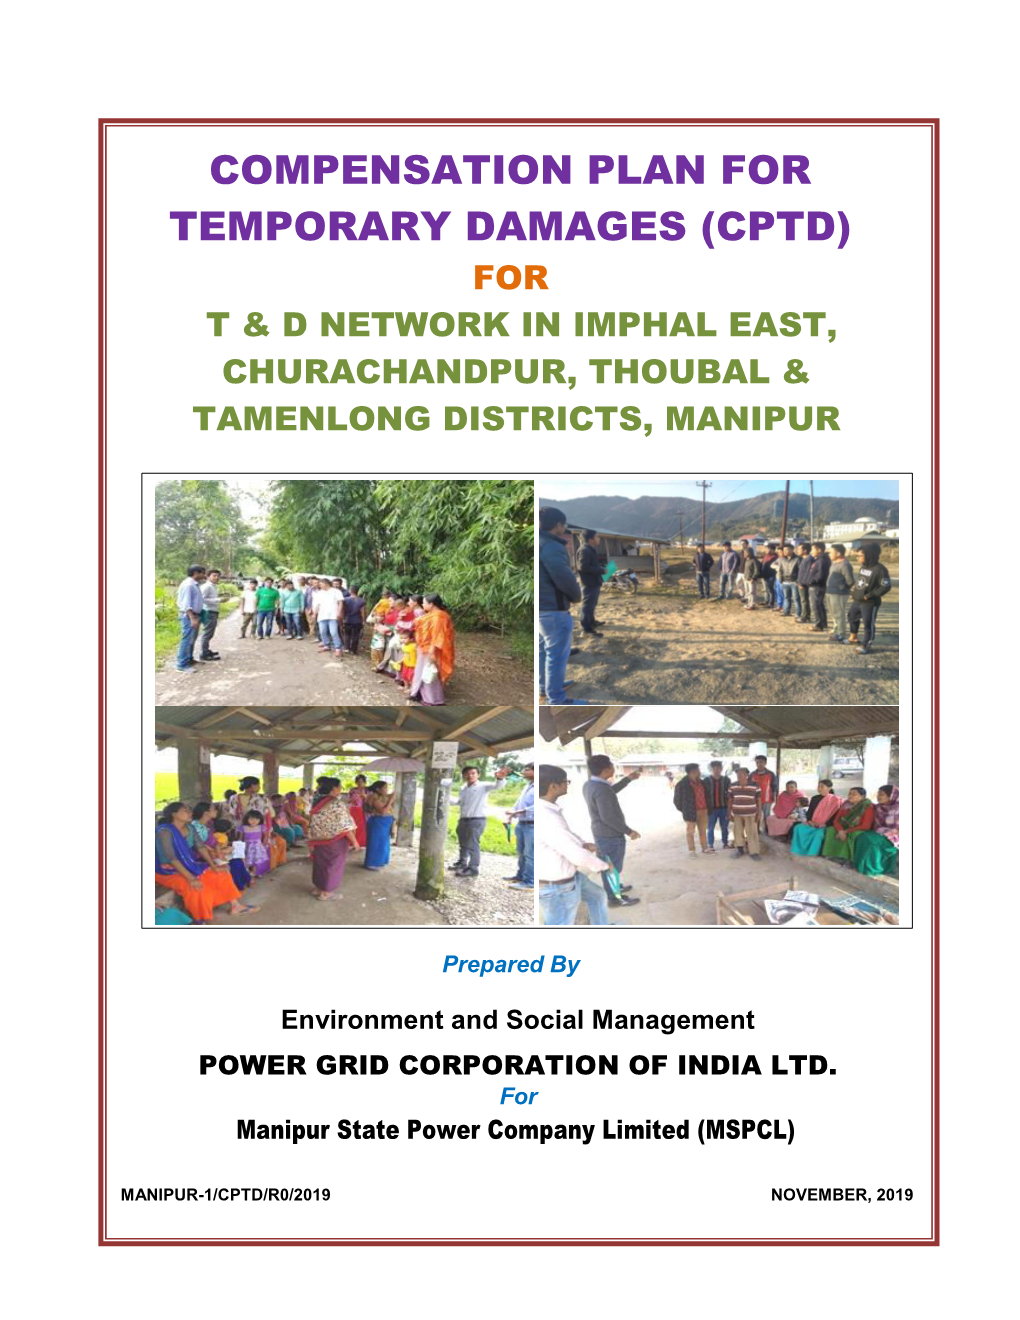 Compensation Plan for Temporary Damages (Cptd) for T & D Network in Imphal East, Churachandpur, Thoubal & Tamenlong Districts, Manipur